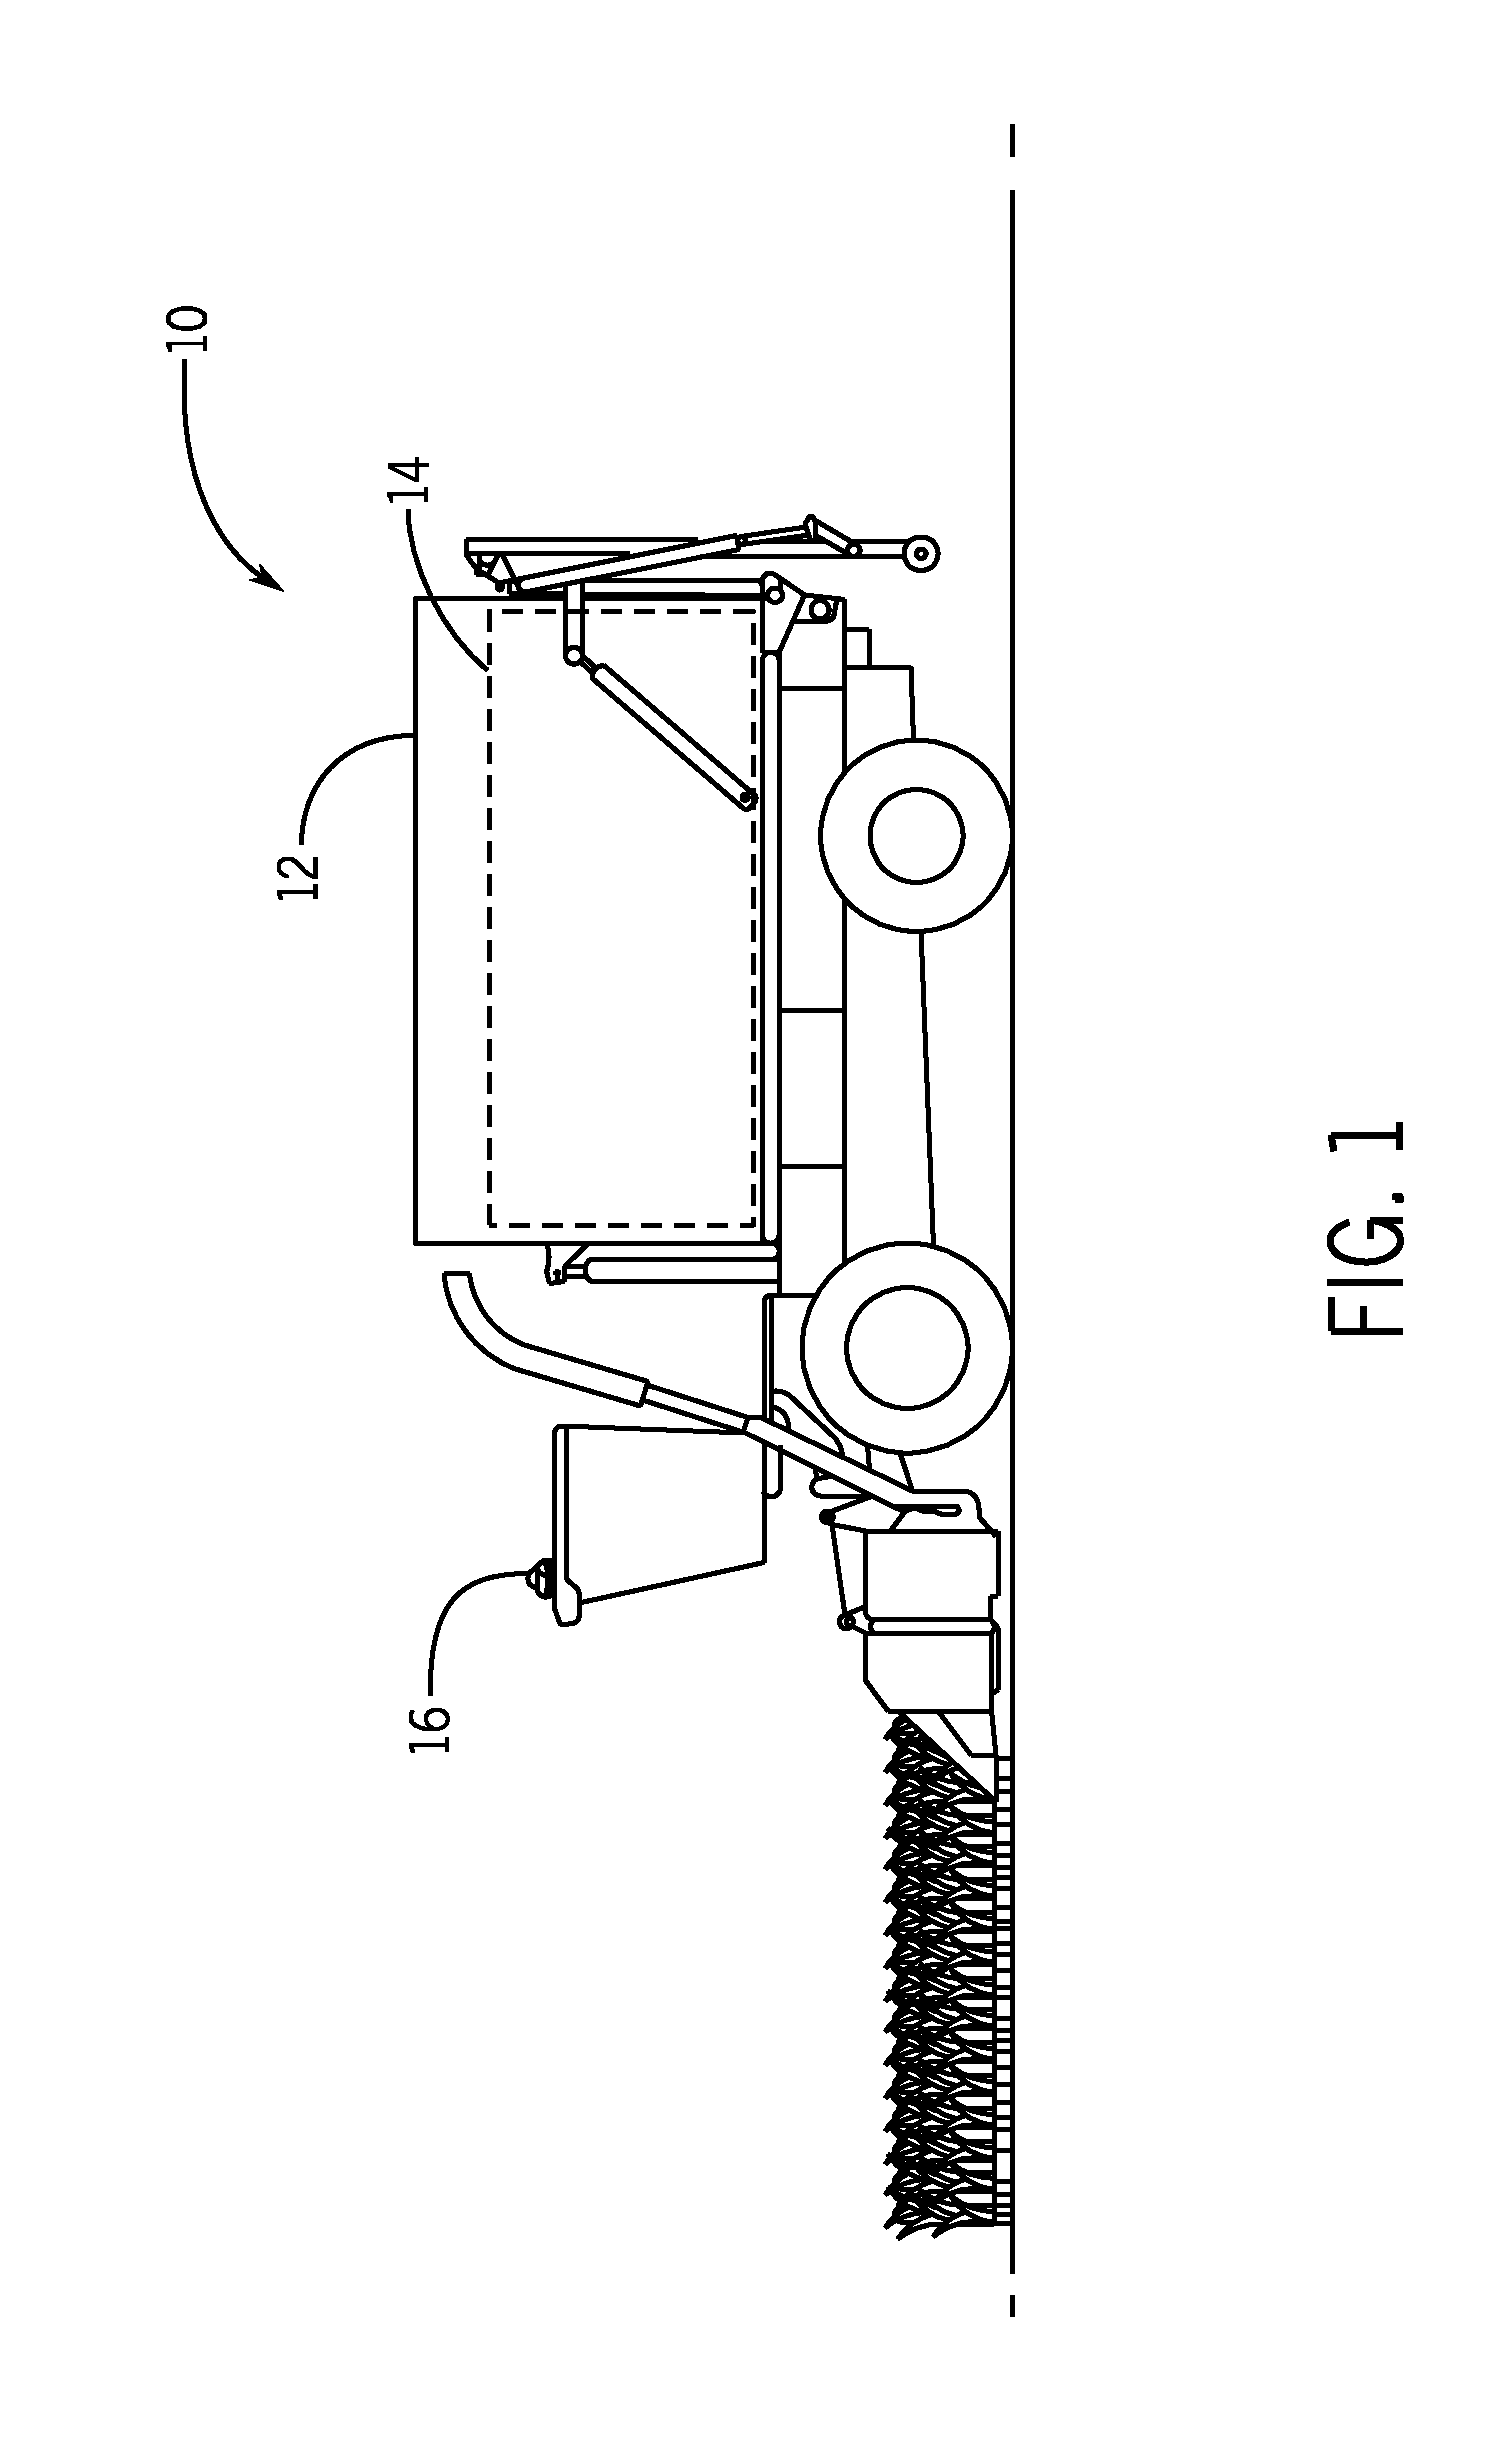 System and method for tracking agricultural product units